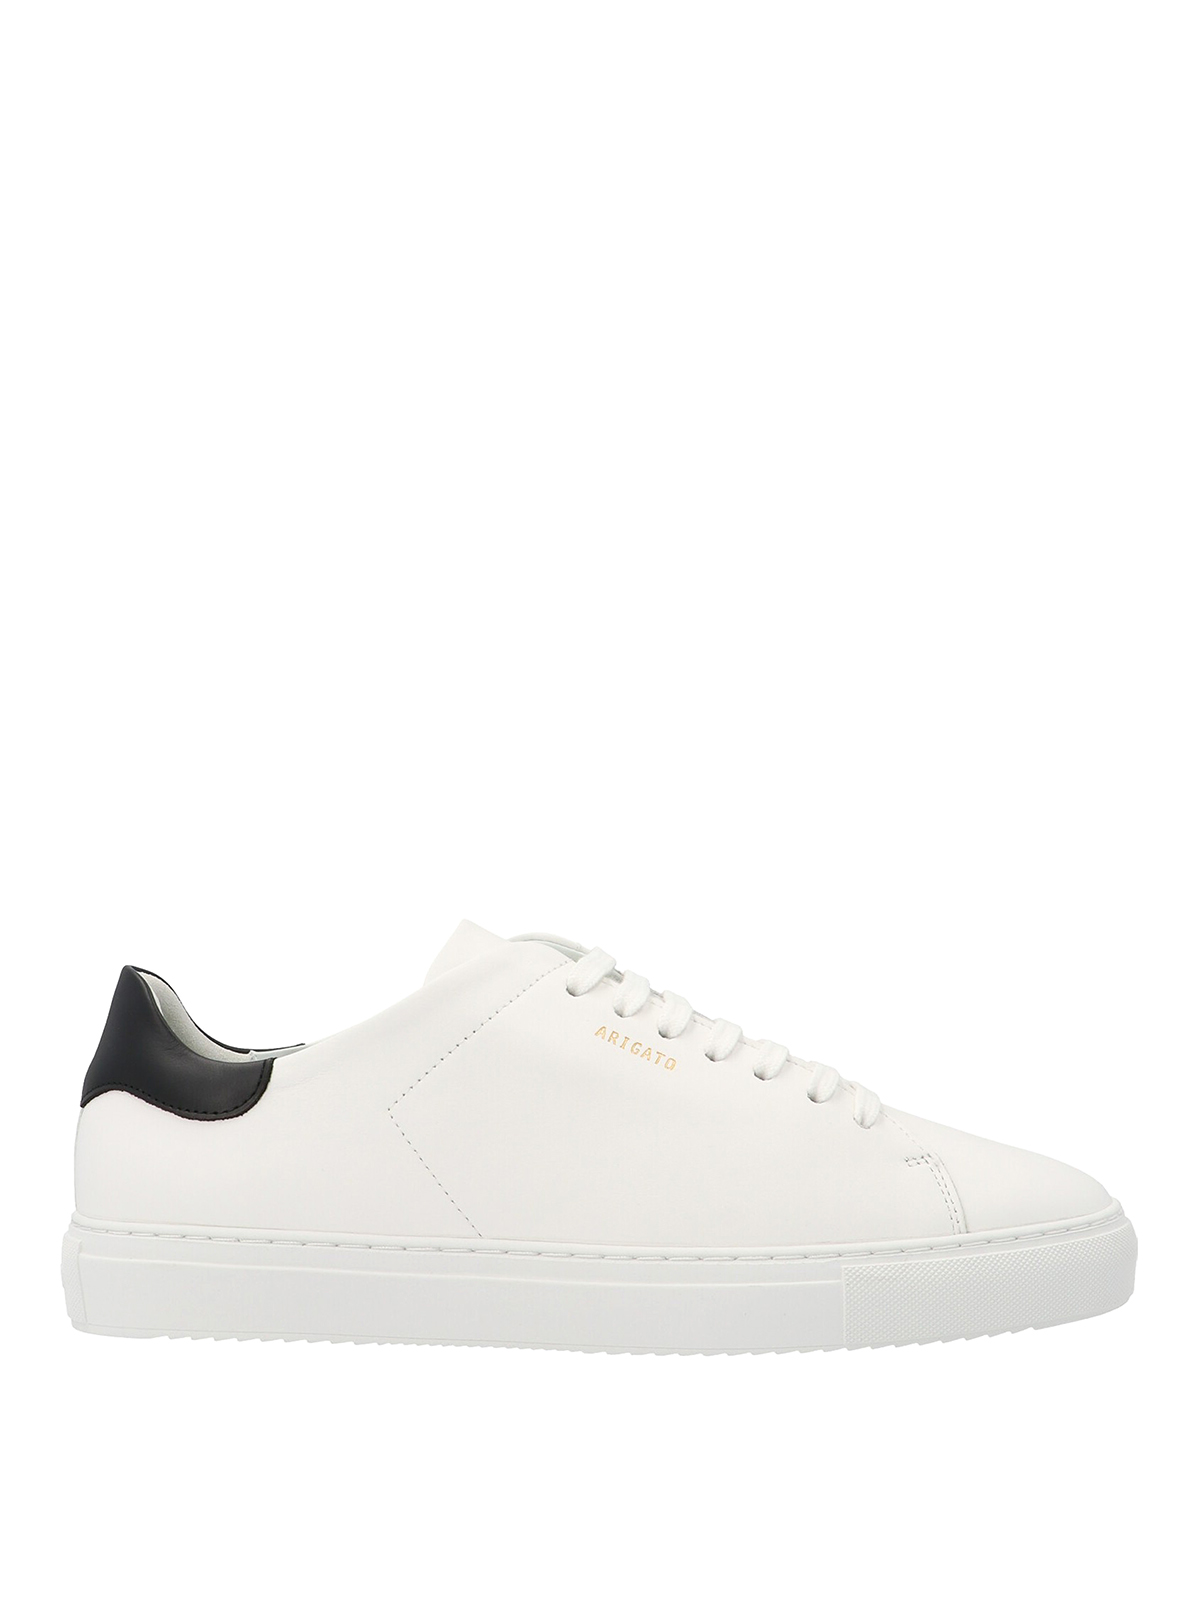 Axel Arigato Clean 90 Contrast Sneakers In White